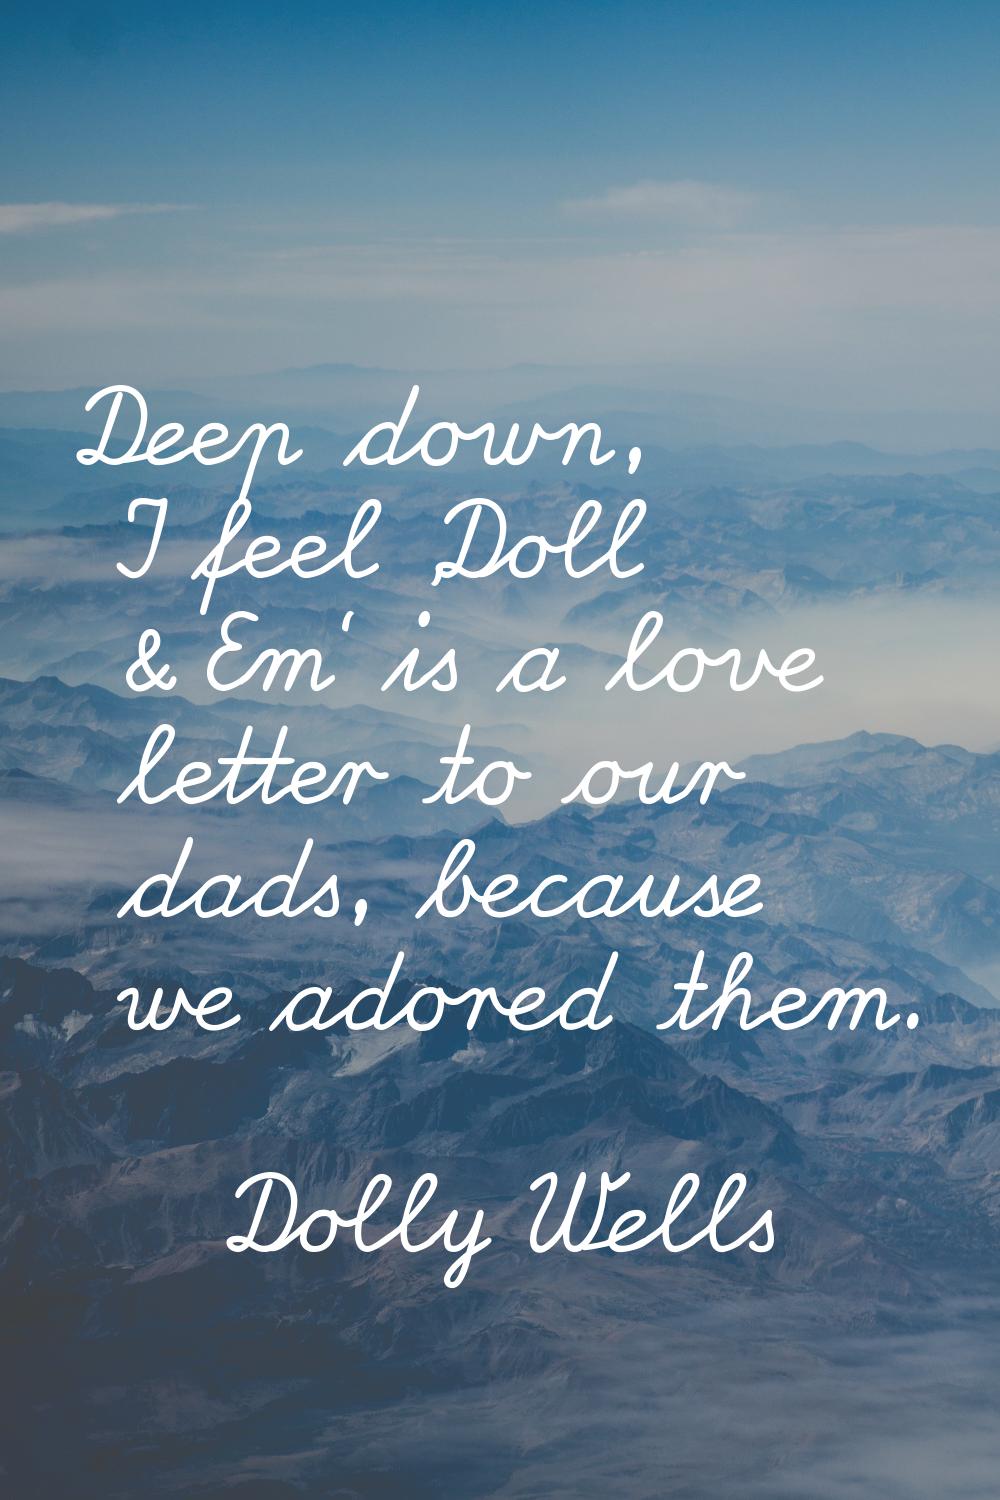 Deep down, I feel 'Doll & Em' is a love letter to our dads, because we adored them.